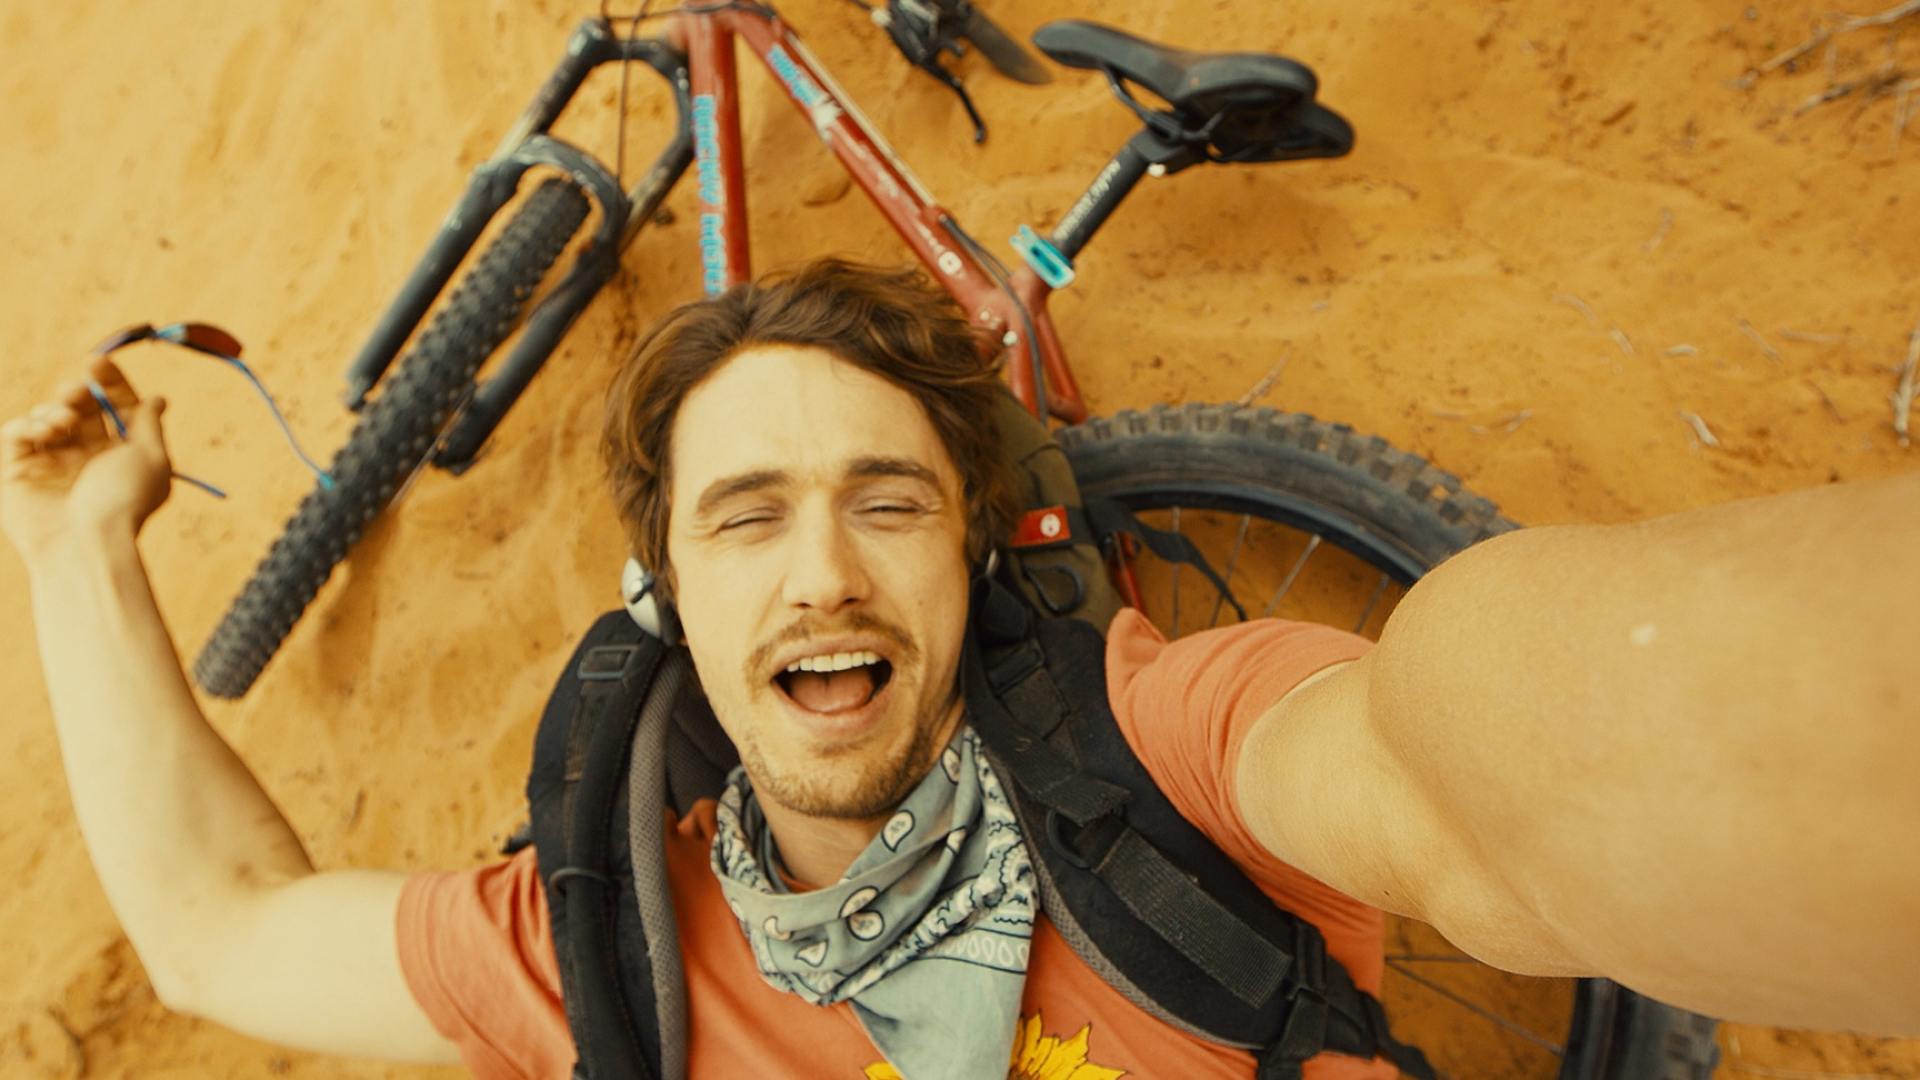 127 Hours: The film was nominated for six Academy Awards, including Best Actor for James Franco. 1920x1080 Full HD Wallpaper.